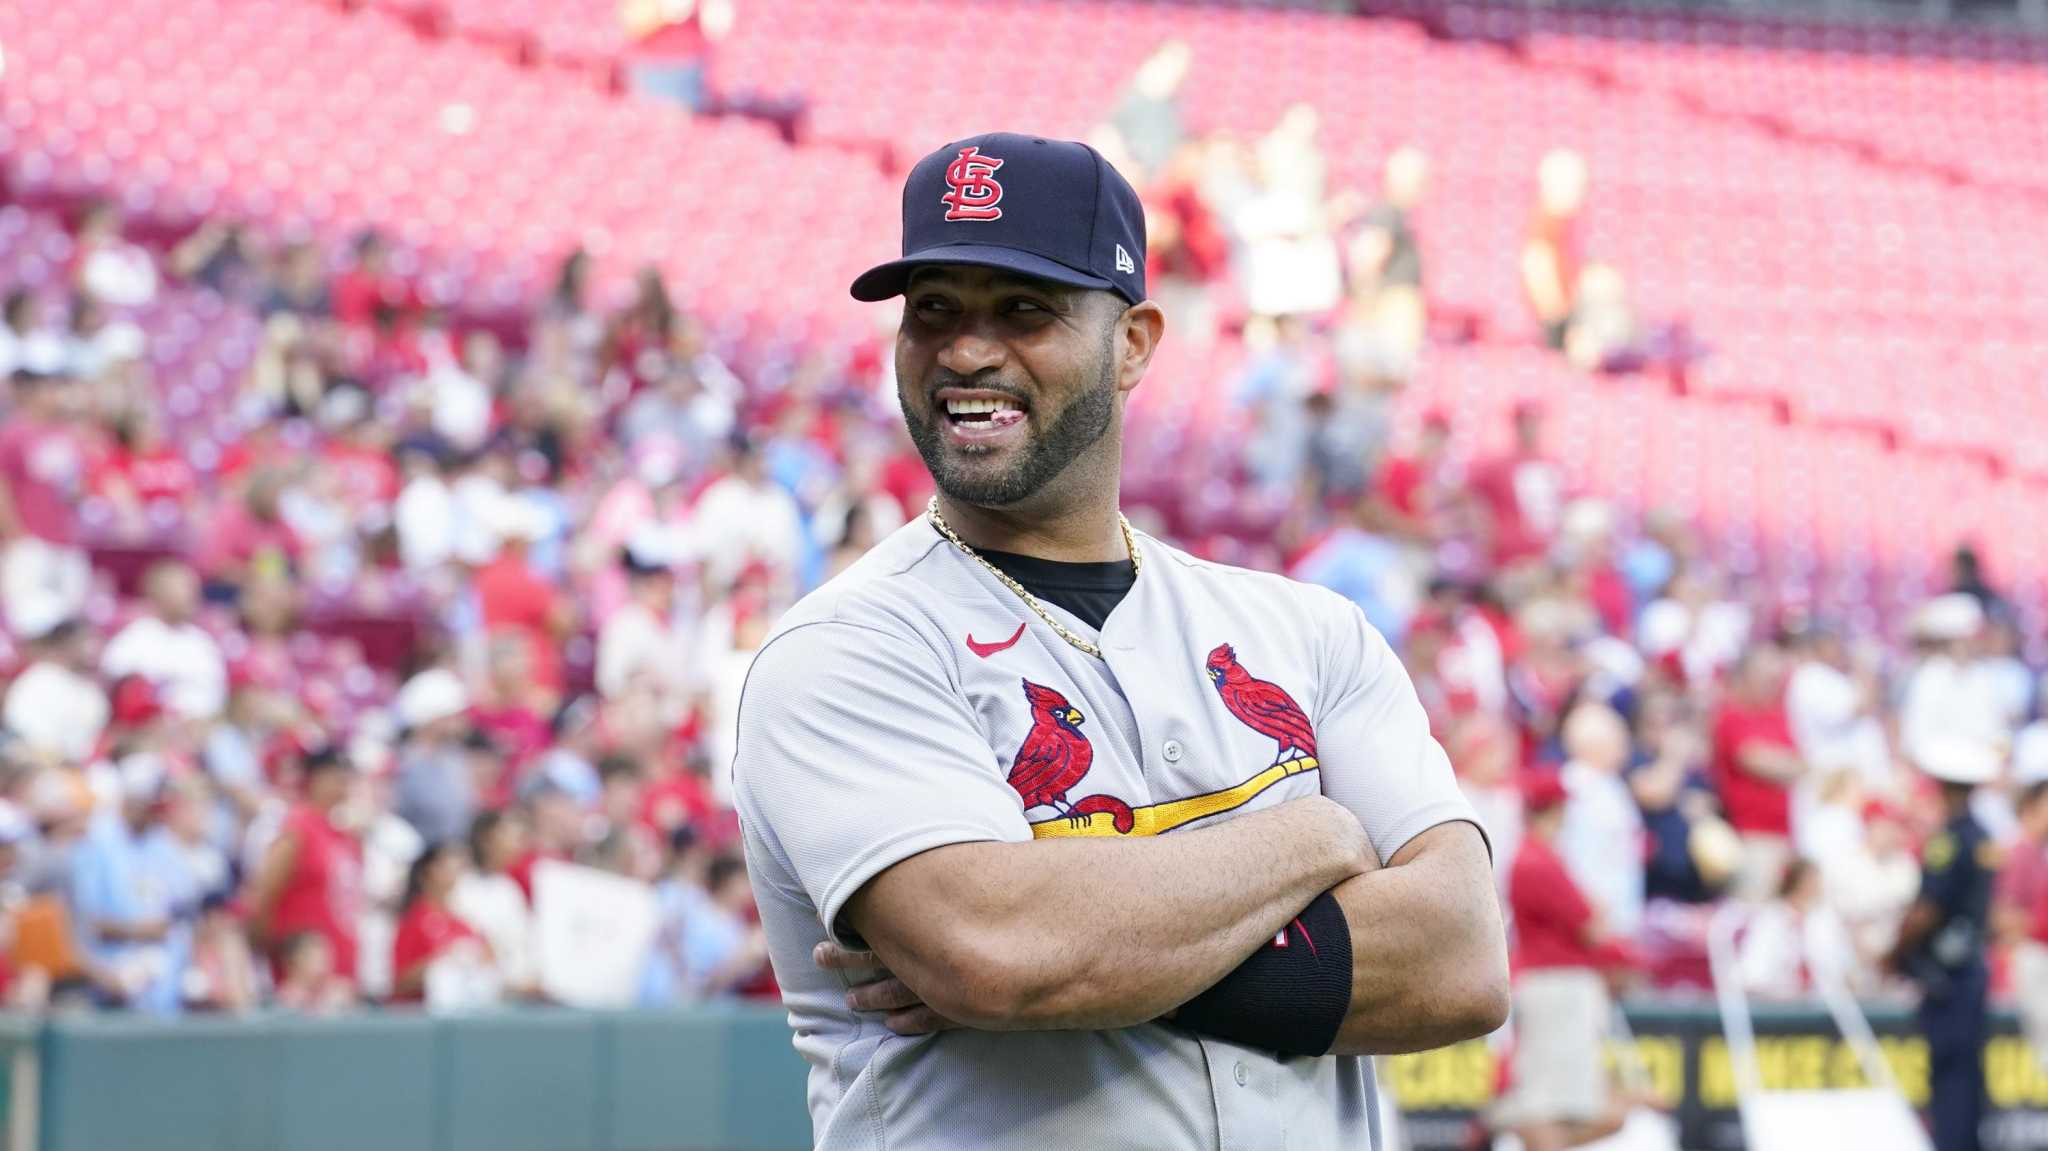 ESPN - Albert Pujols moved up in history passing Barry Bonds on